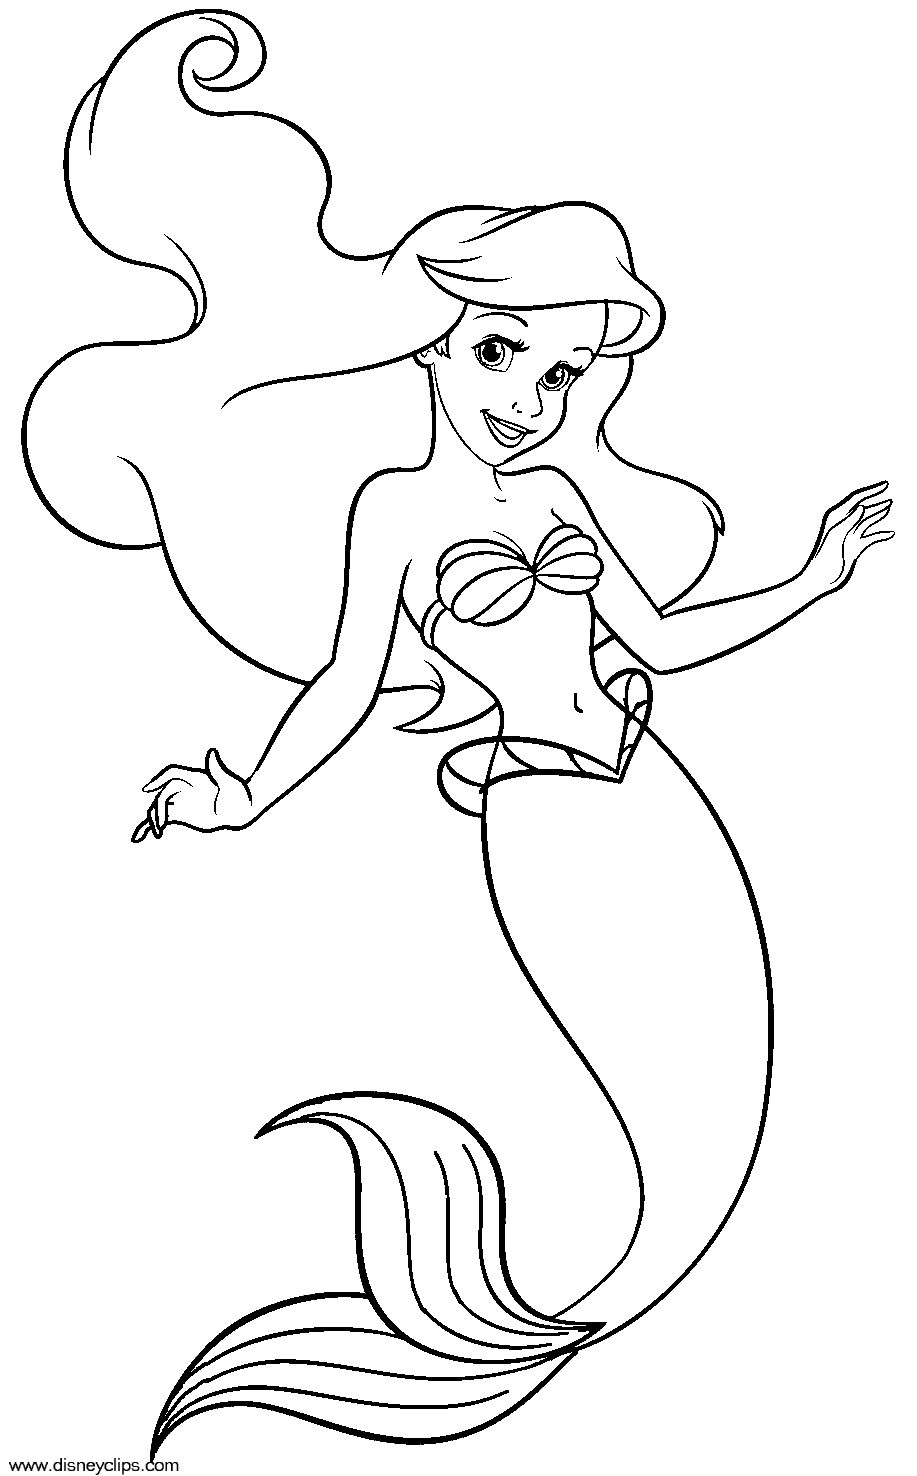 717 Simple Ariel Coloring Pages with Animal character